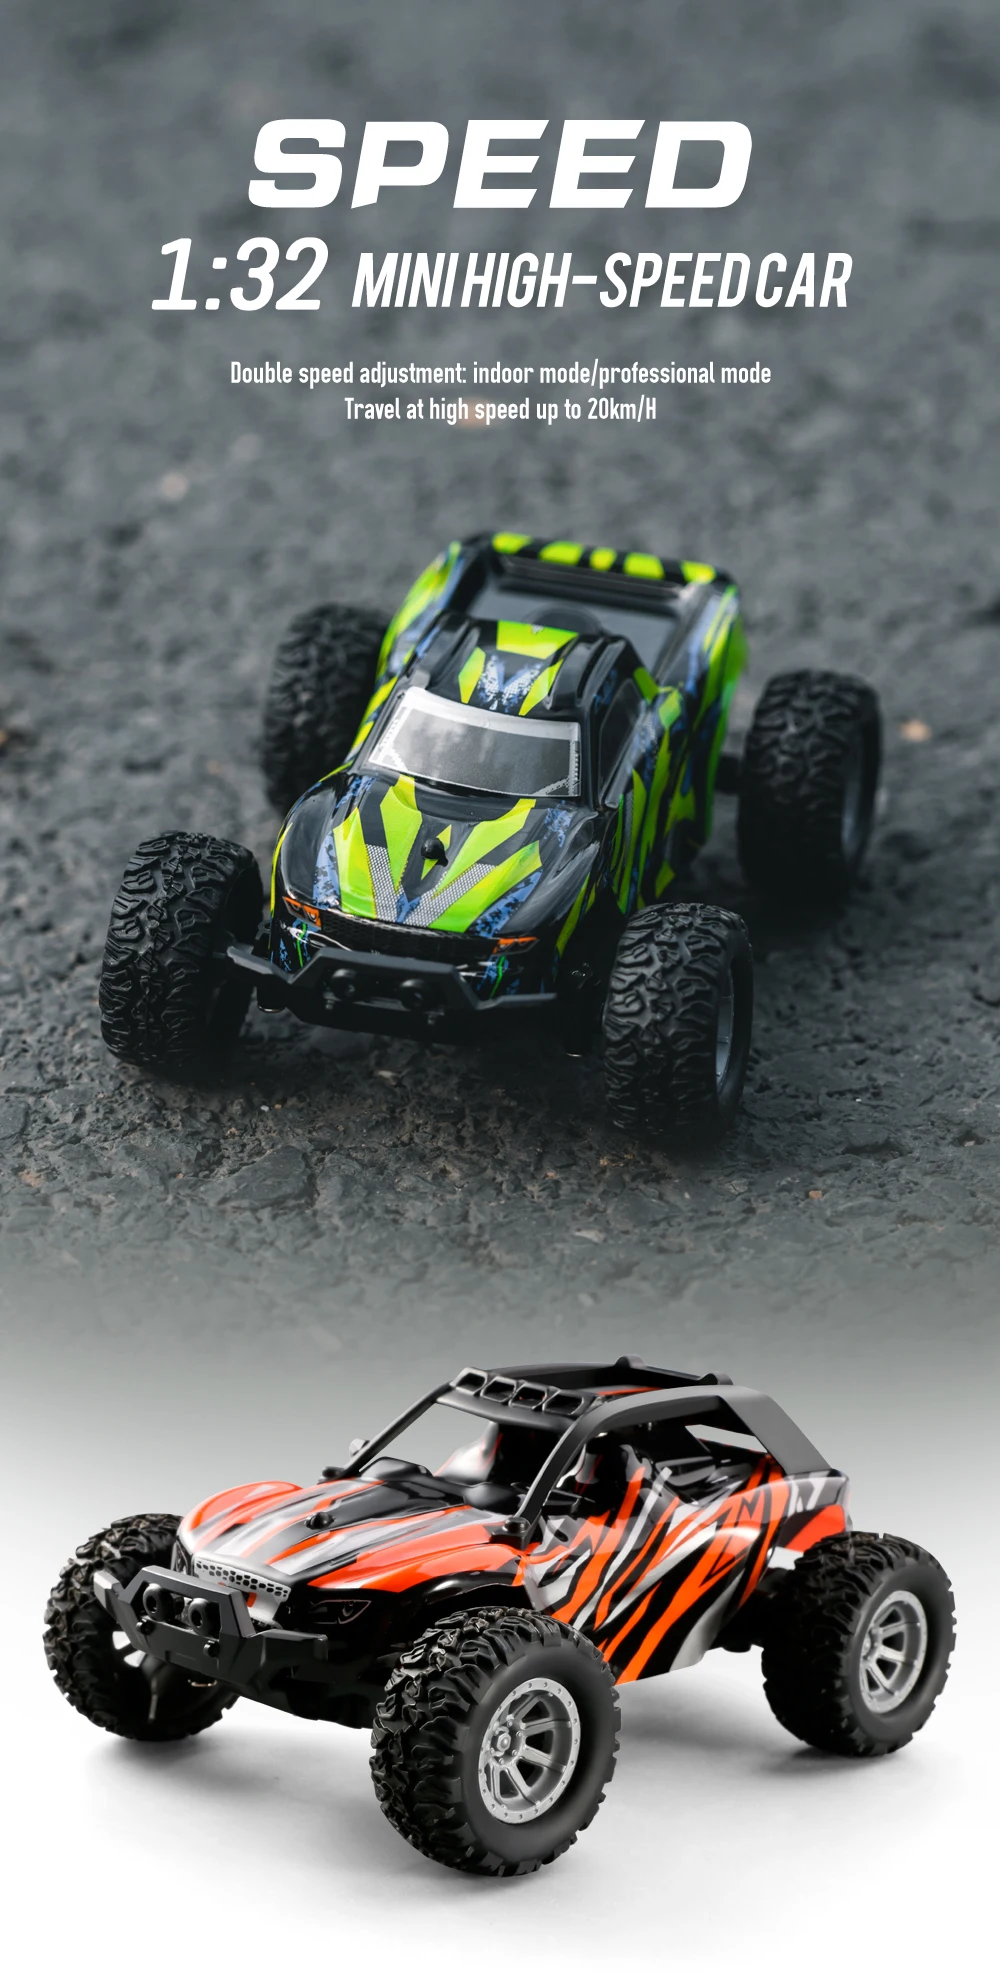 remote control car Roclub 1:32 MINI RC Climbing Cars Toy For Children Boys High Speed Remote Control Off-Road Vehicle Model For Christmas Gift control car